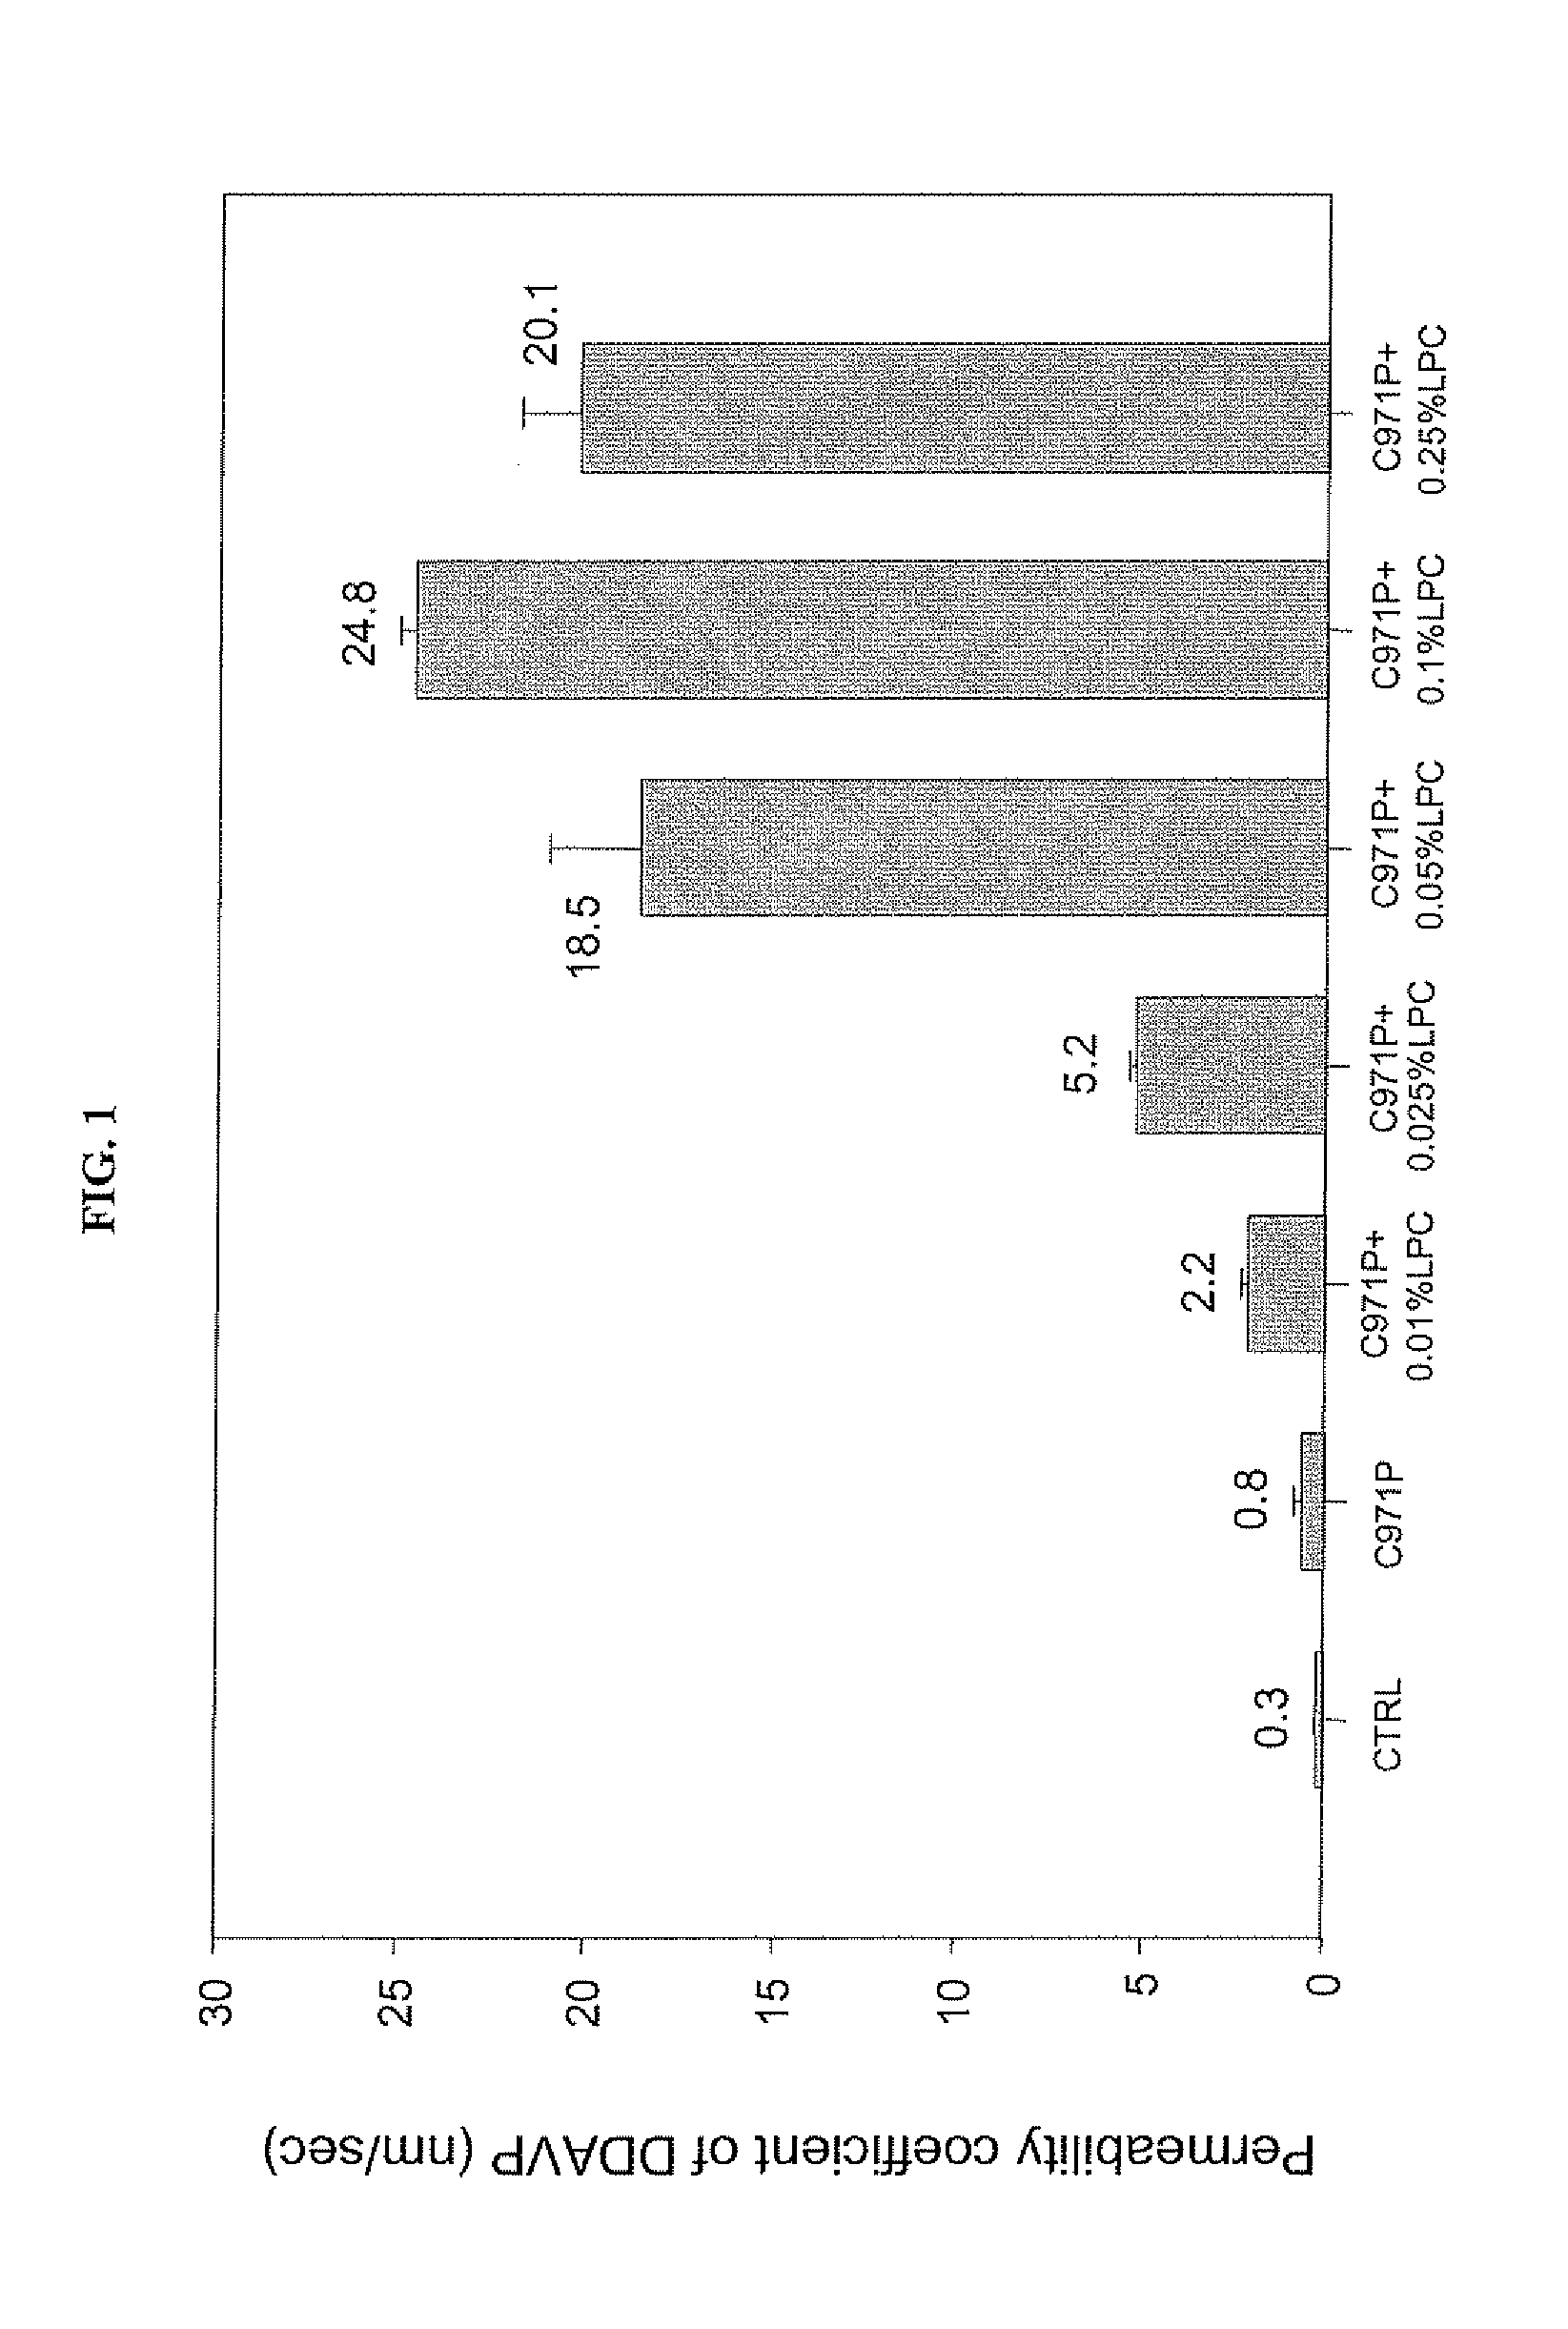 Composition for enhancing absorption of a drug and method